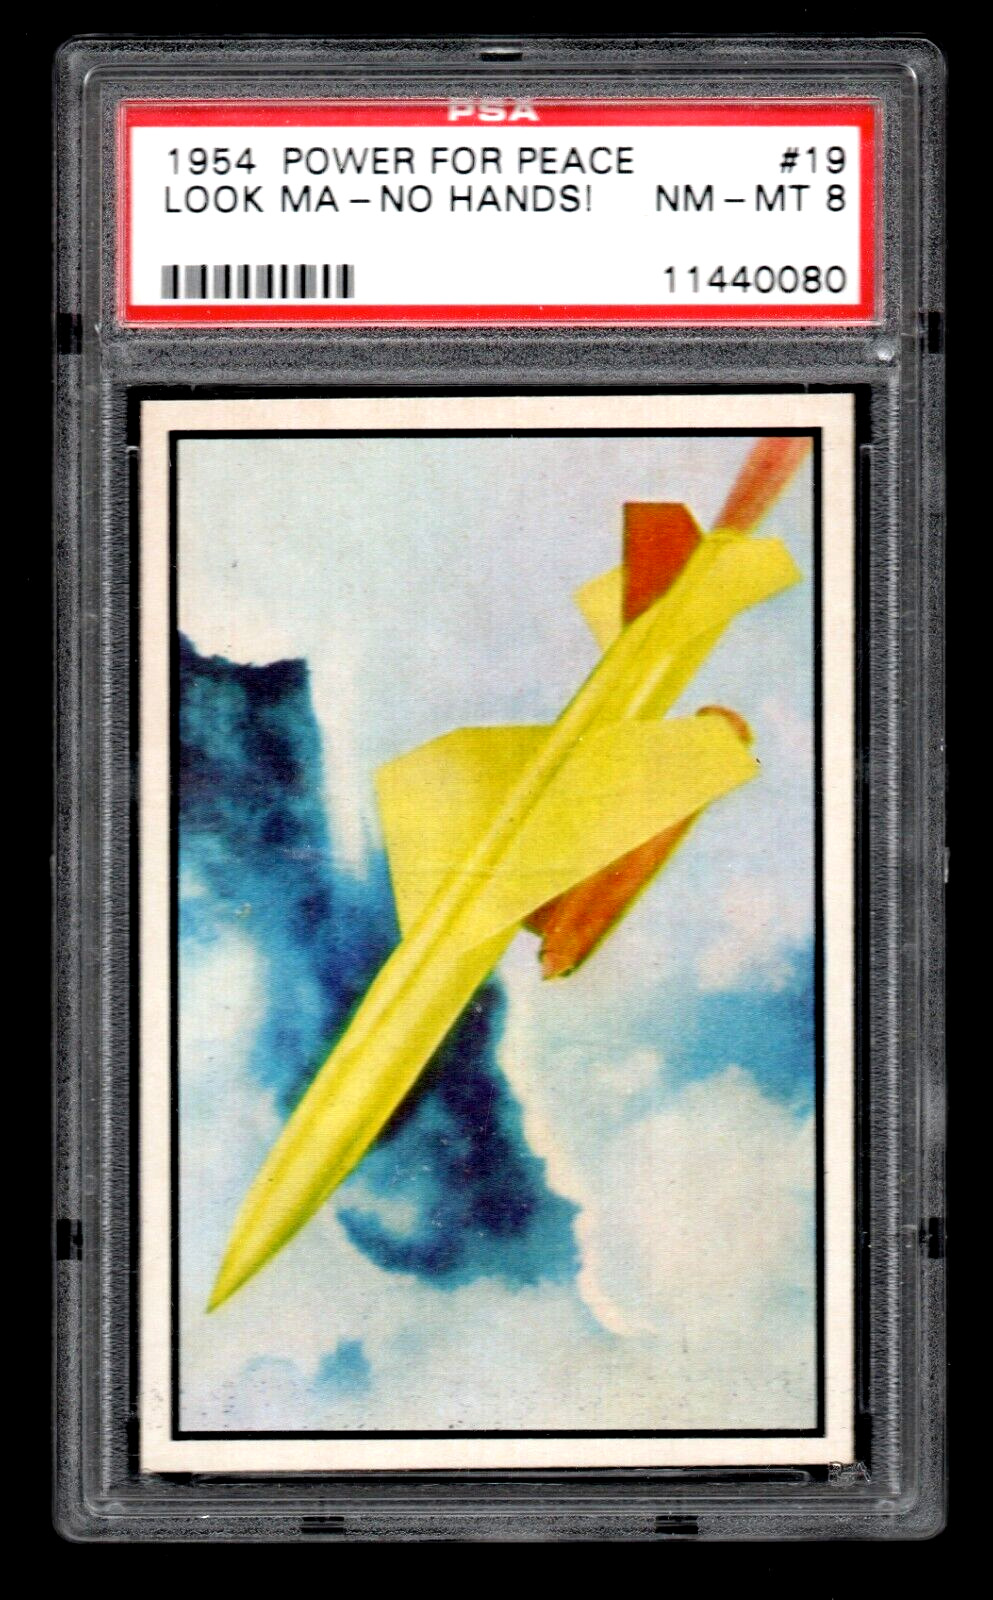 1954 Bowman Power For Peace #19 Look Ma No Hands PSA 8